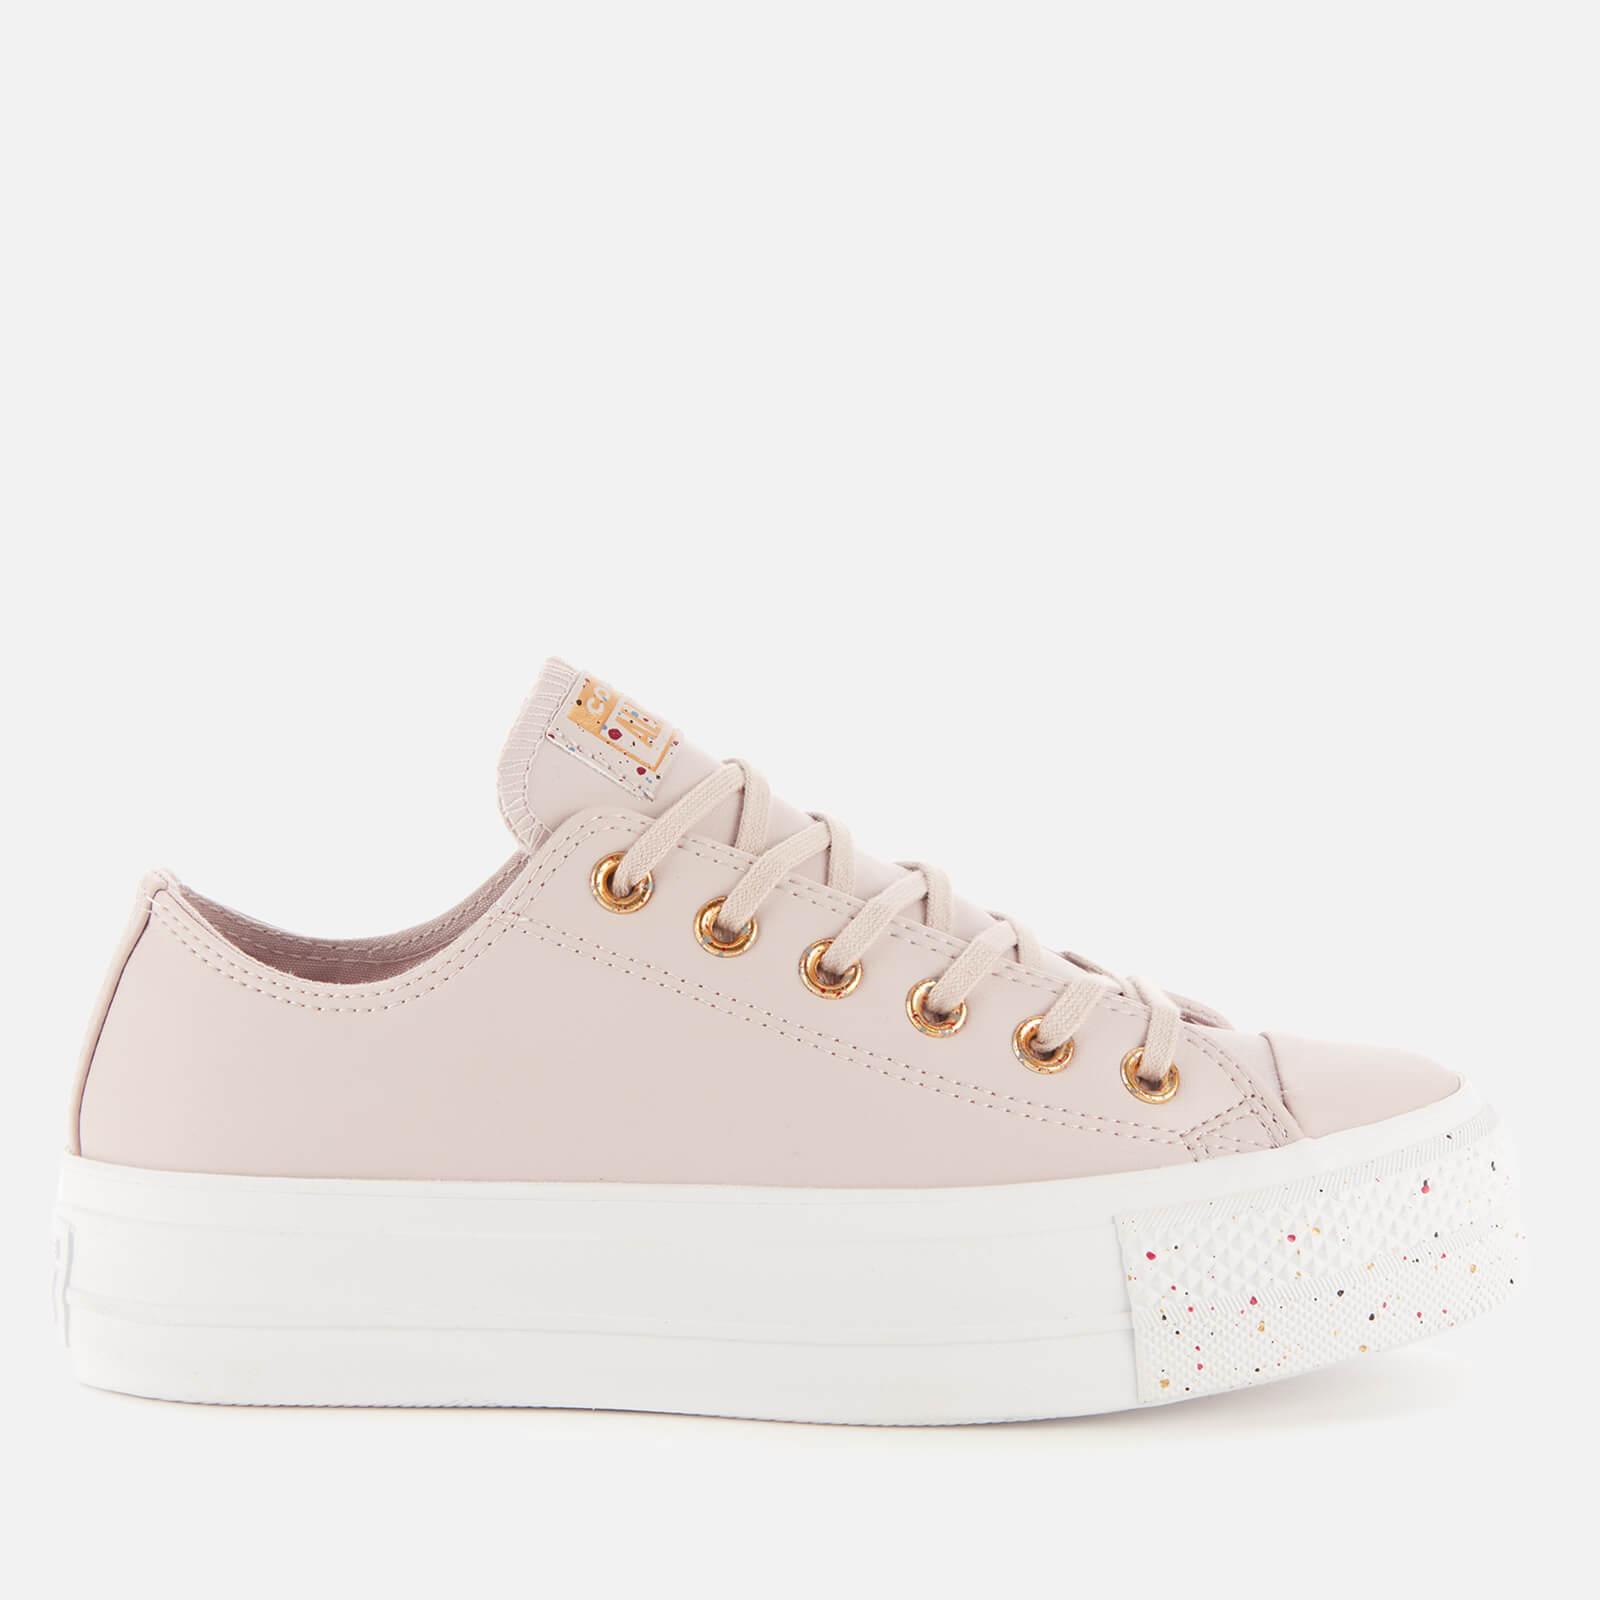 converse all star ox sneaker rose gold